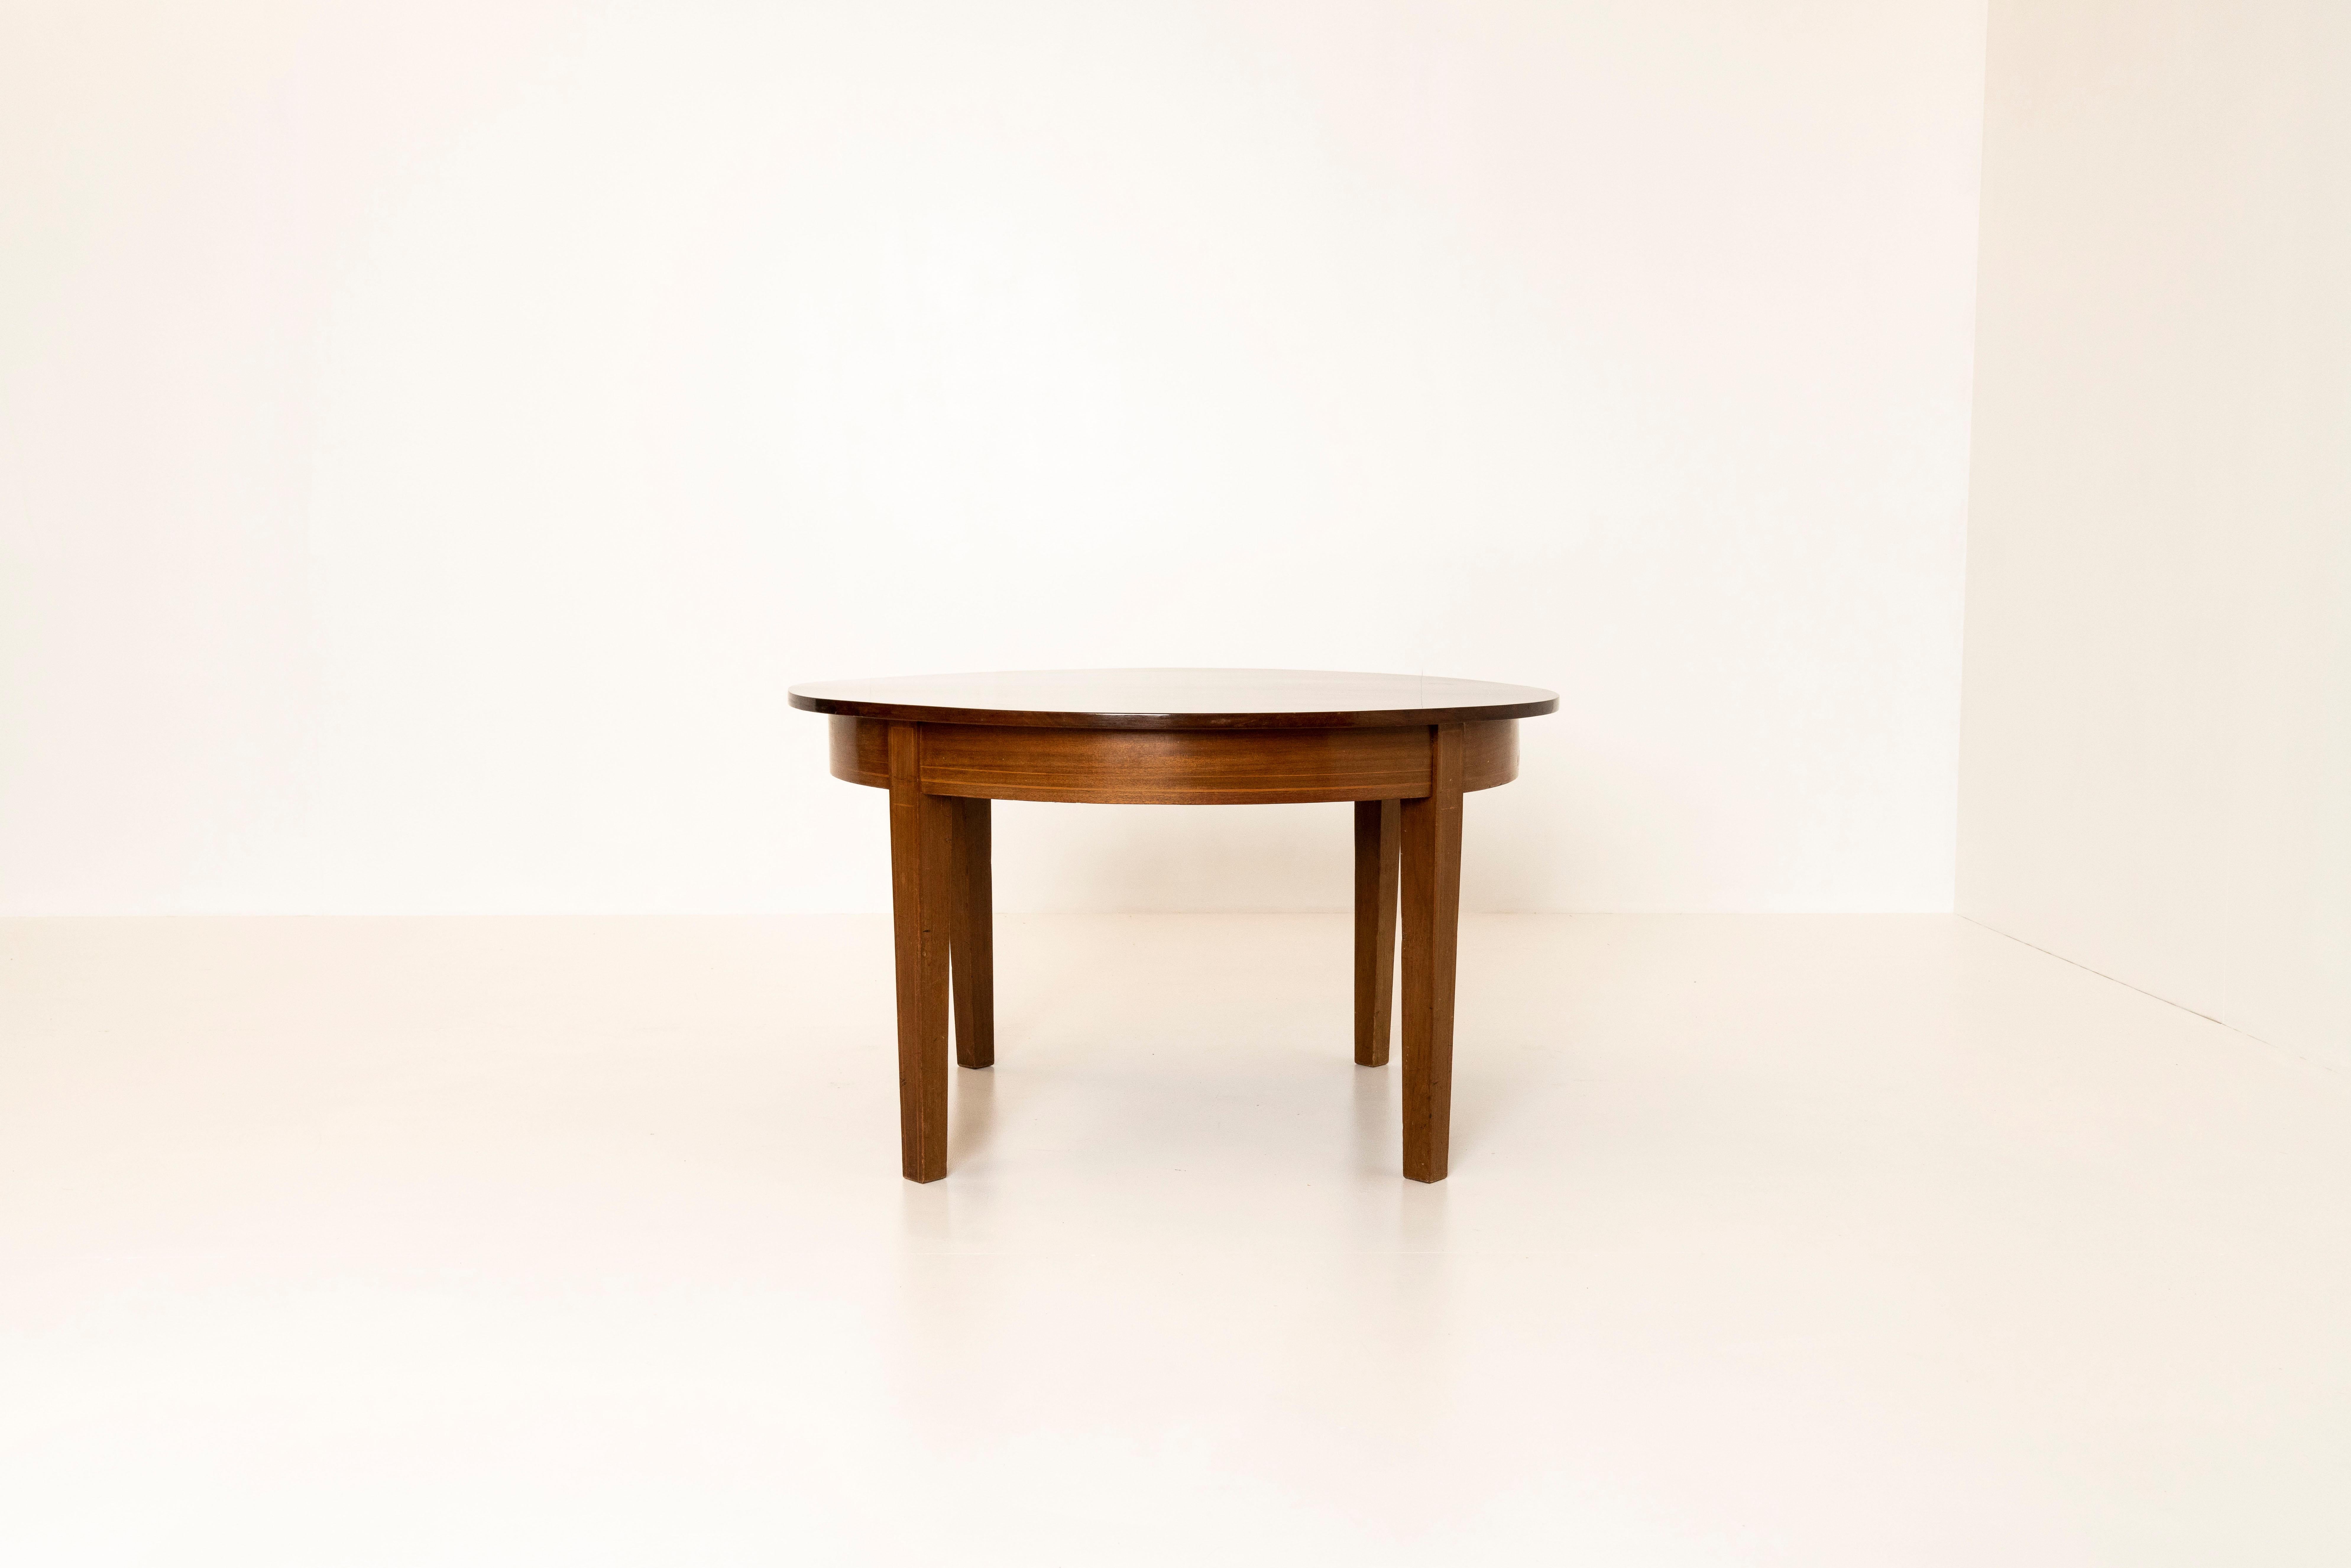 Charming Danish Round Coffee Table in Mahogany, the 1960s. This table has a gold-colored lining across the table and the tabletop. It has a minimal and functional design and is in good condition, with normal wear and tear due to its age.